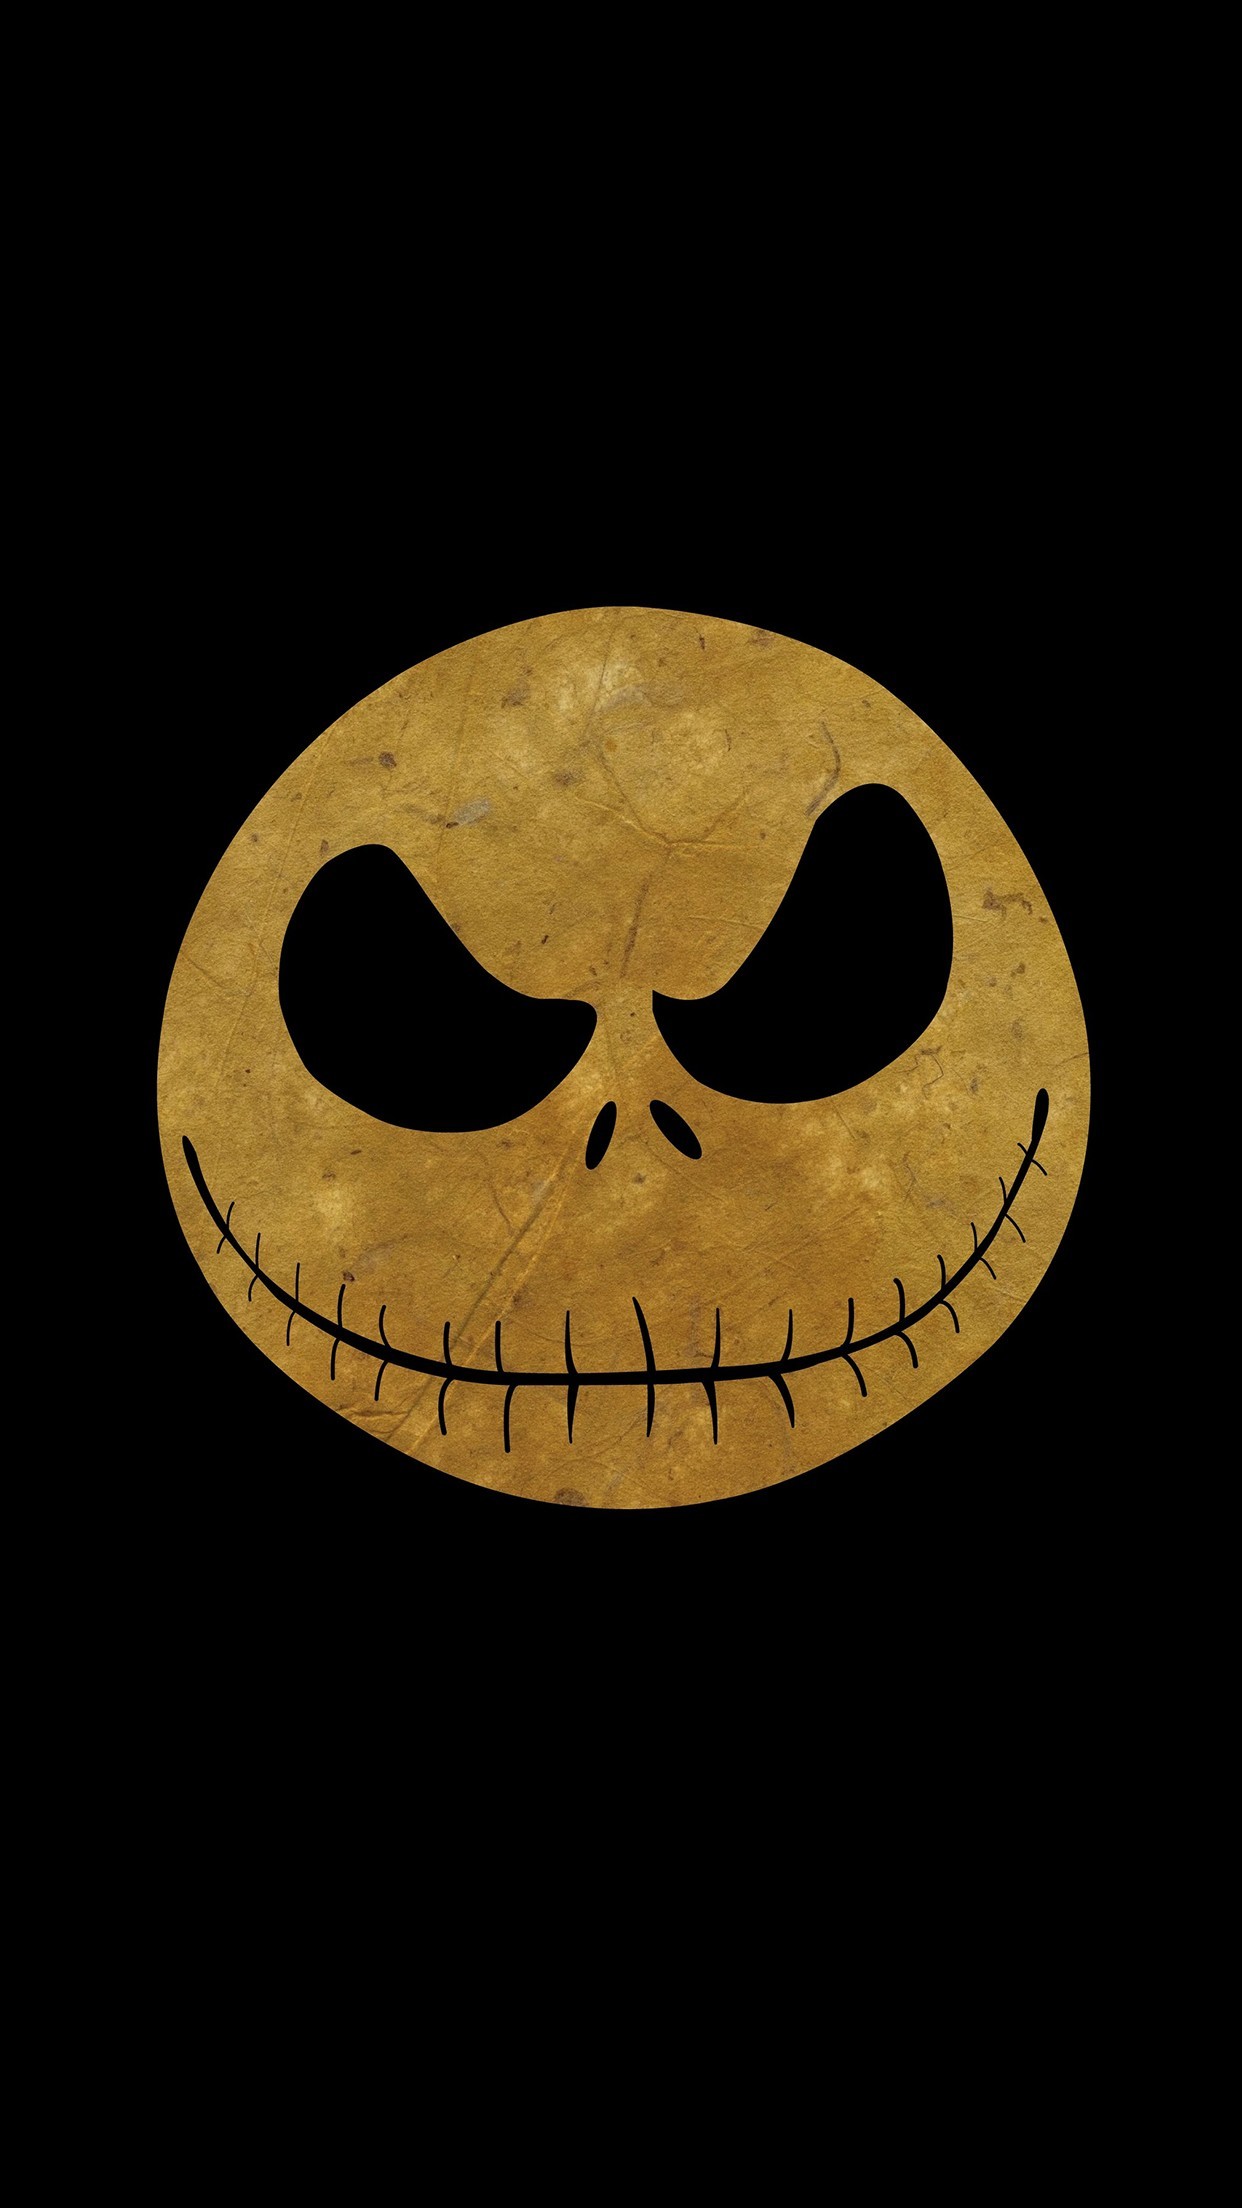 1242x2208  Wallpapers for all iPhone Retina ÃÂ» The Nightmare Before Christmas  .